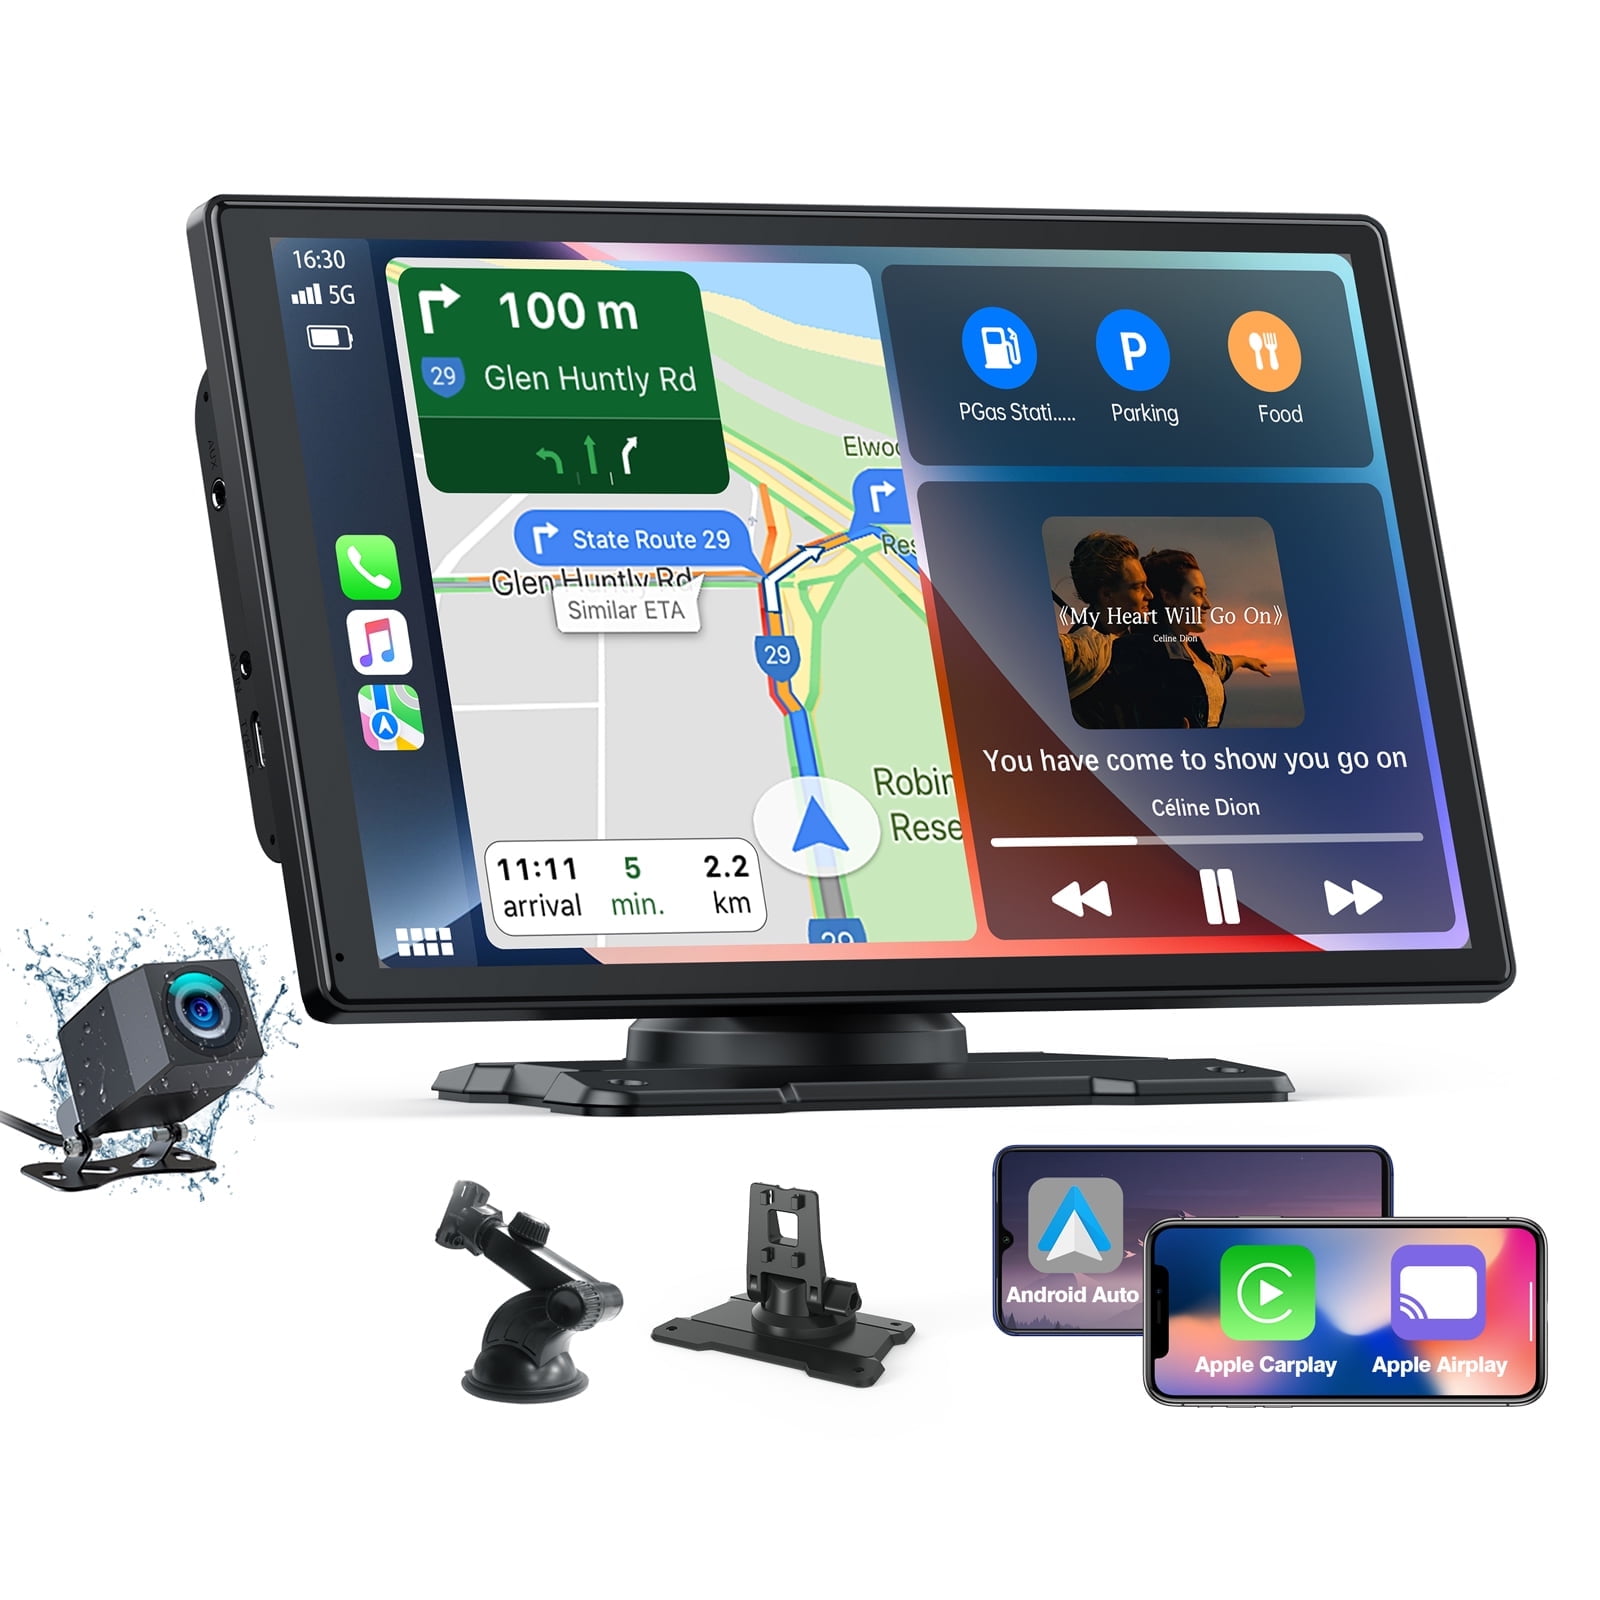  10 Inch Wireless Portable Apple Carplay Screen for Car Plug  in.4k Dash Cam with Android Auto. Portable Car Stereo. Car Play Box Dash  Mount,Driveplay Bluetooth,GPS Navigation,Radio,Airplay : Electronics